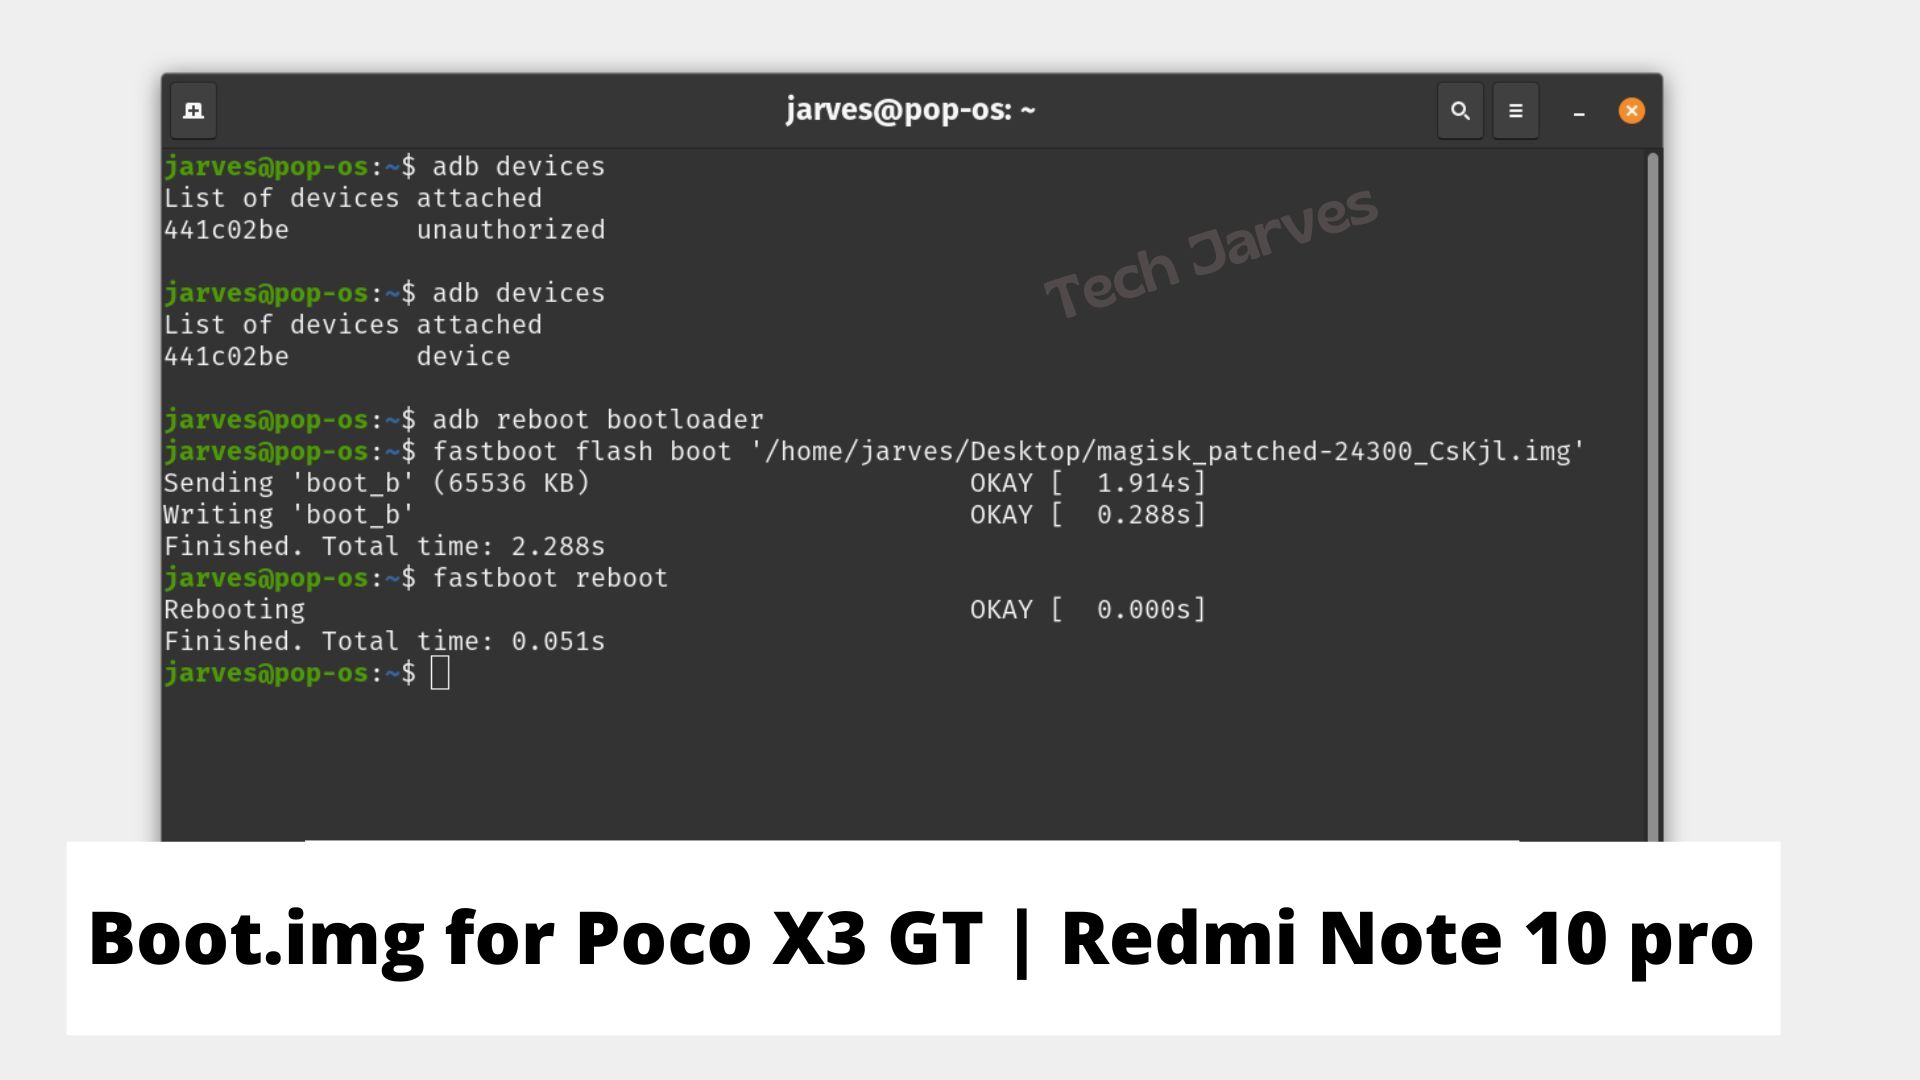 Boot.img for Poco x3 gt Redmi Note 10 pro